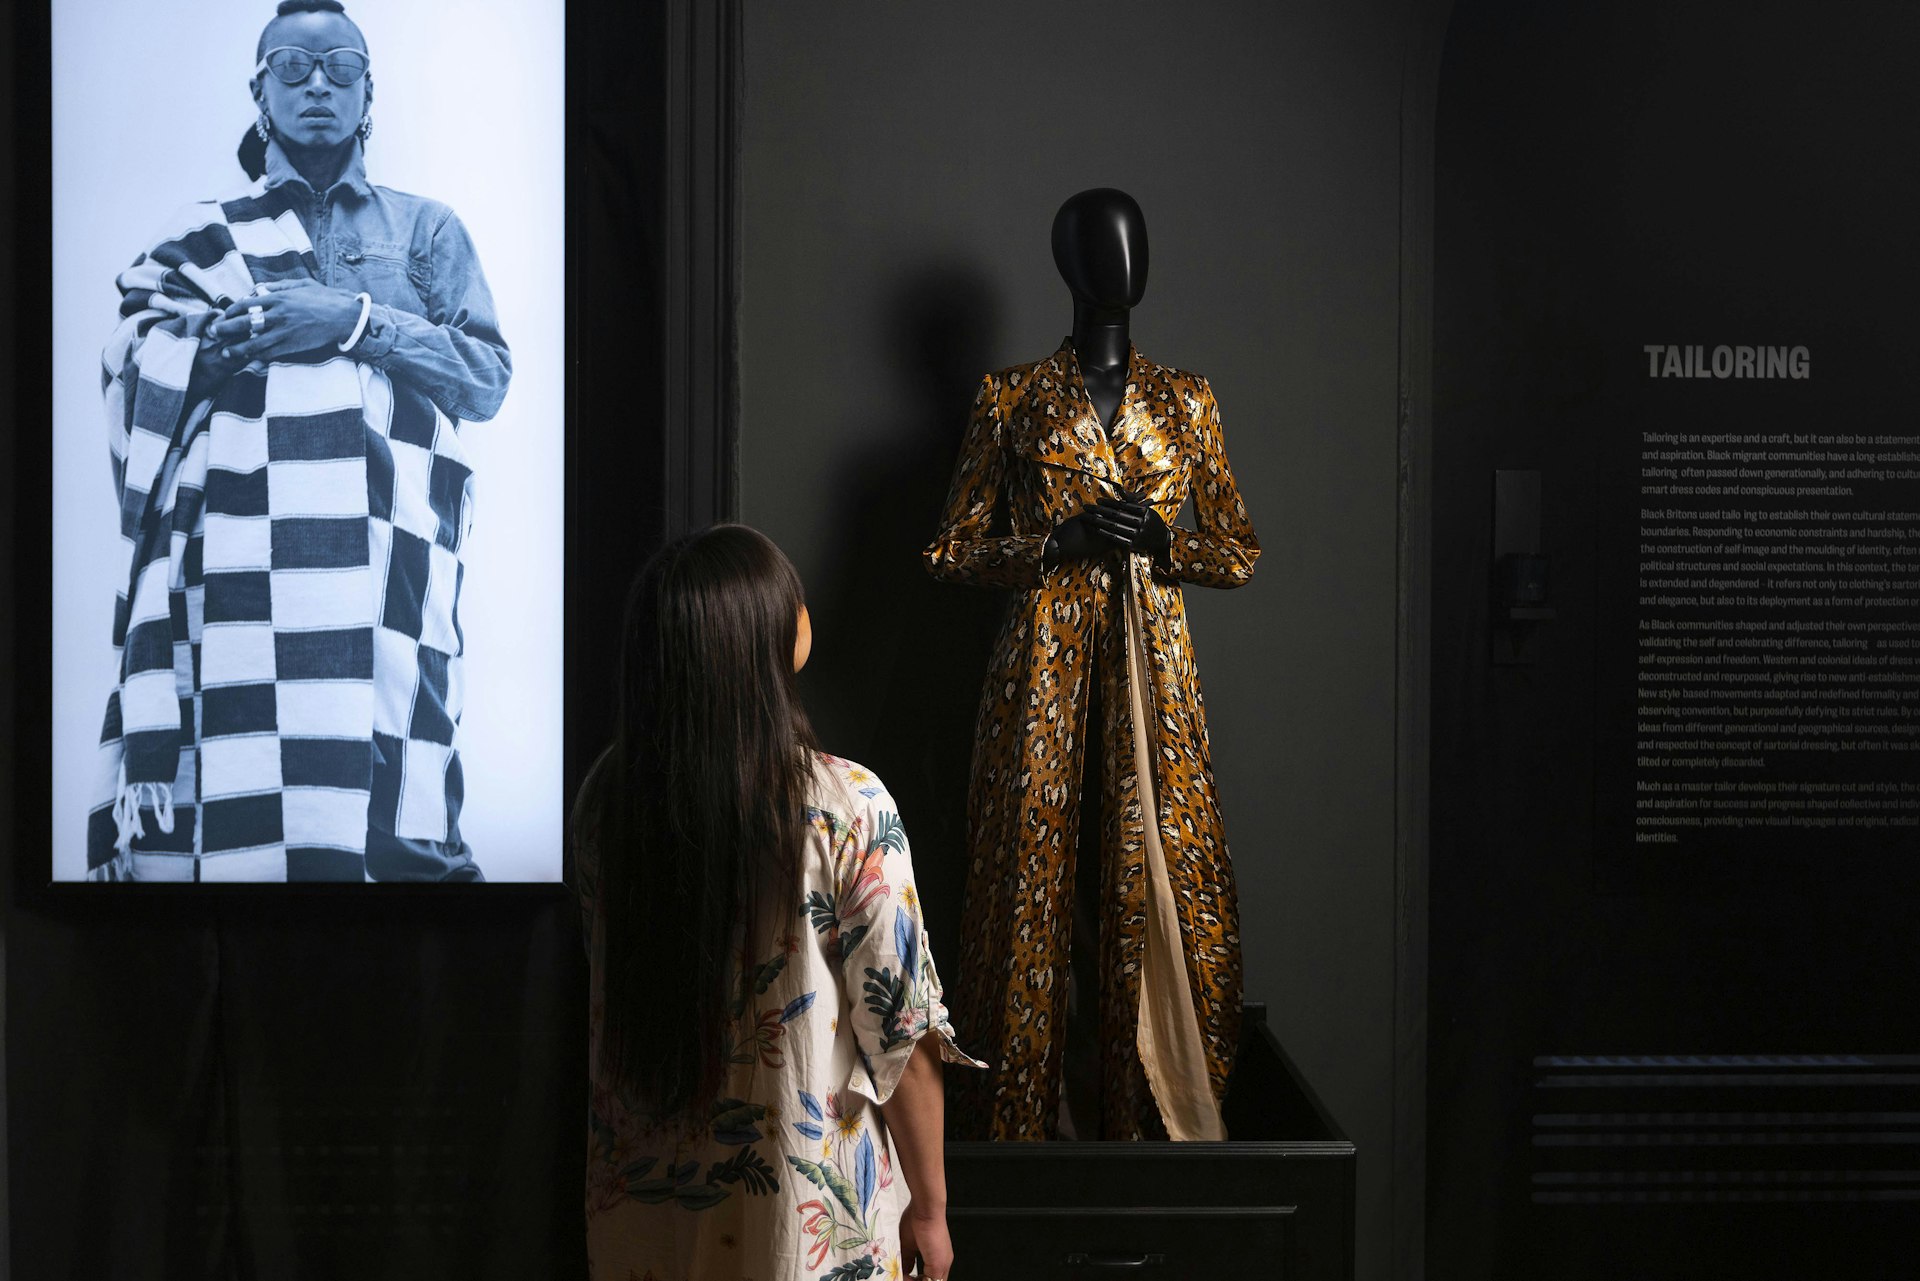 Erica Davletov views a piece by Ninivah Khomo ahead of the opening of ‘The Morgan Stanley Exhibition - The Missing Thread: Untold Stories of Black British Fashion’ at Somerset House, London